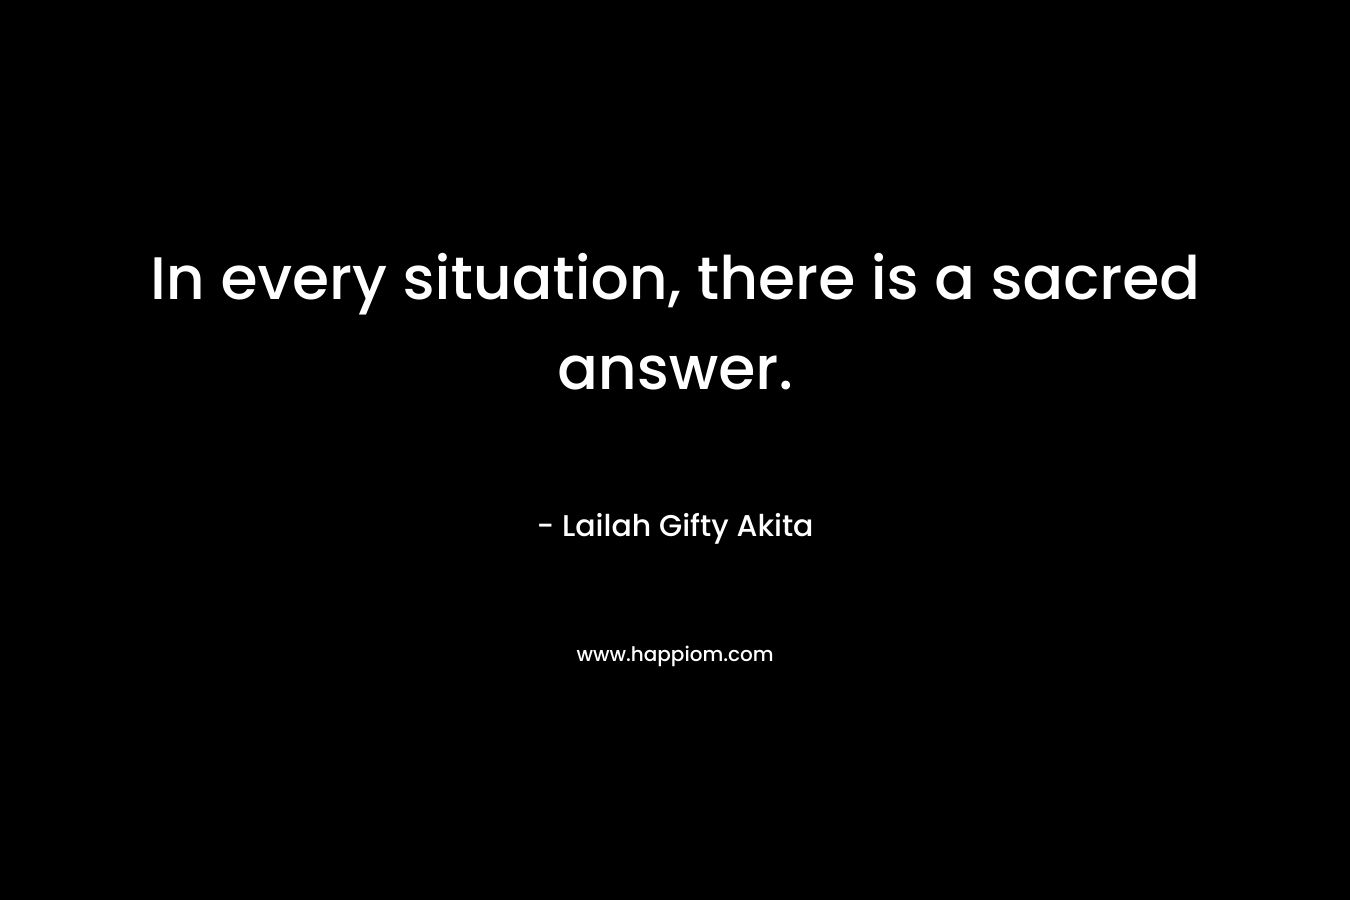 In every situation, there is a sacred answer.